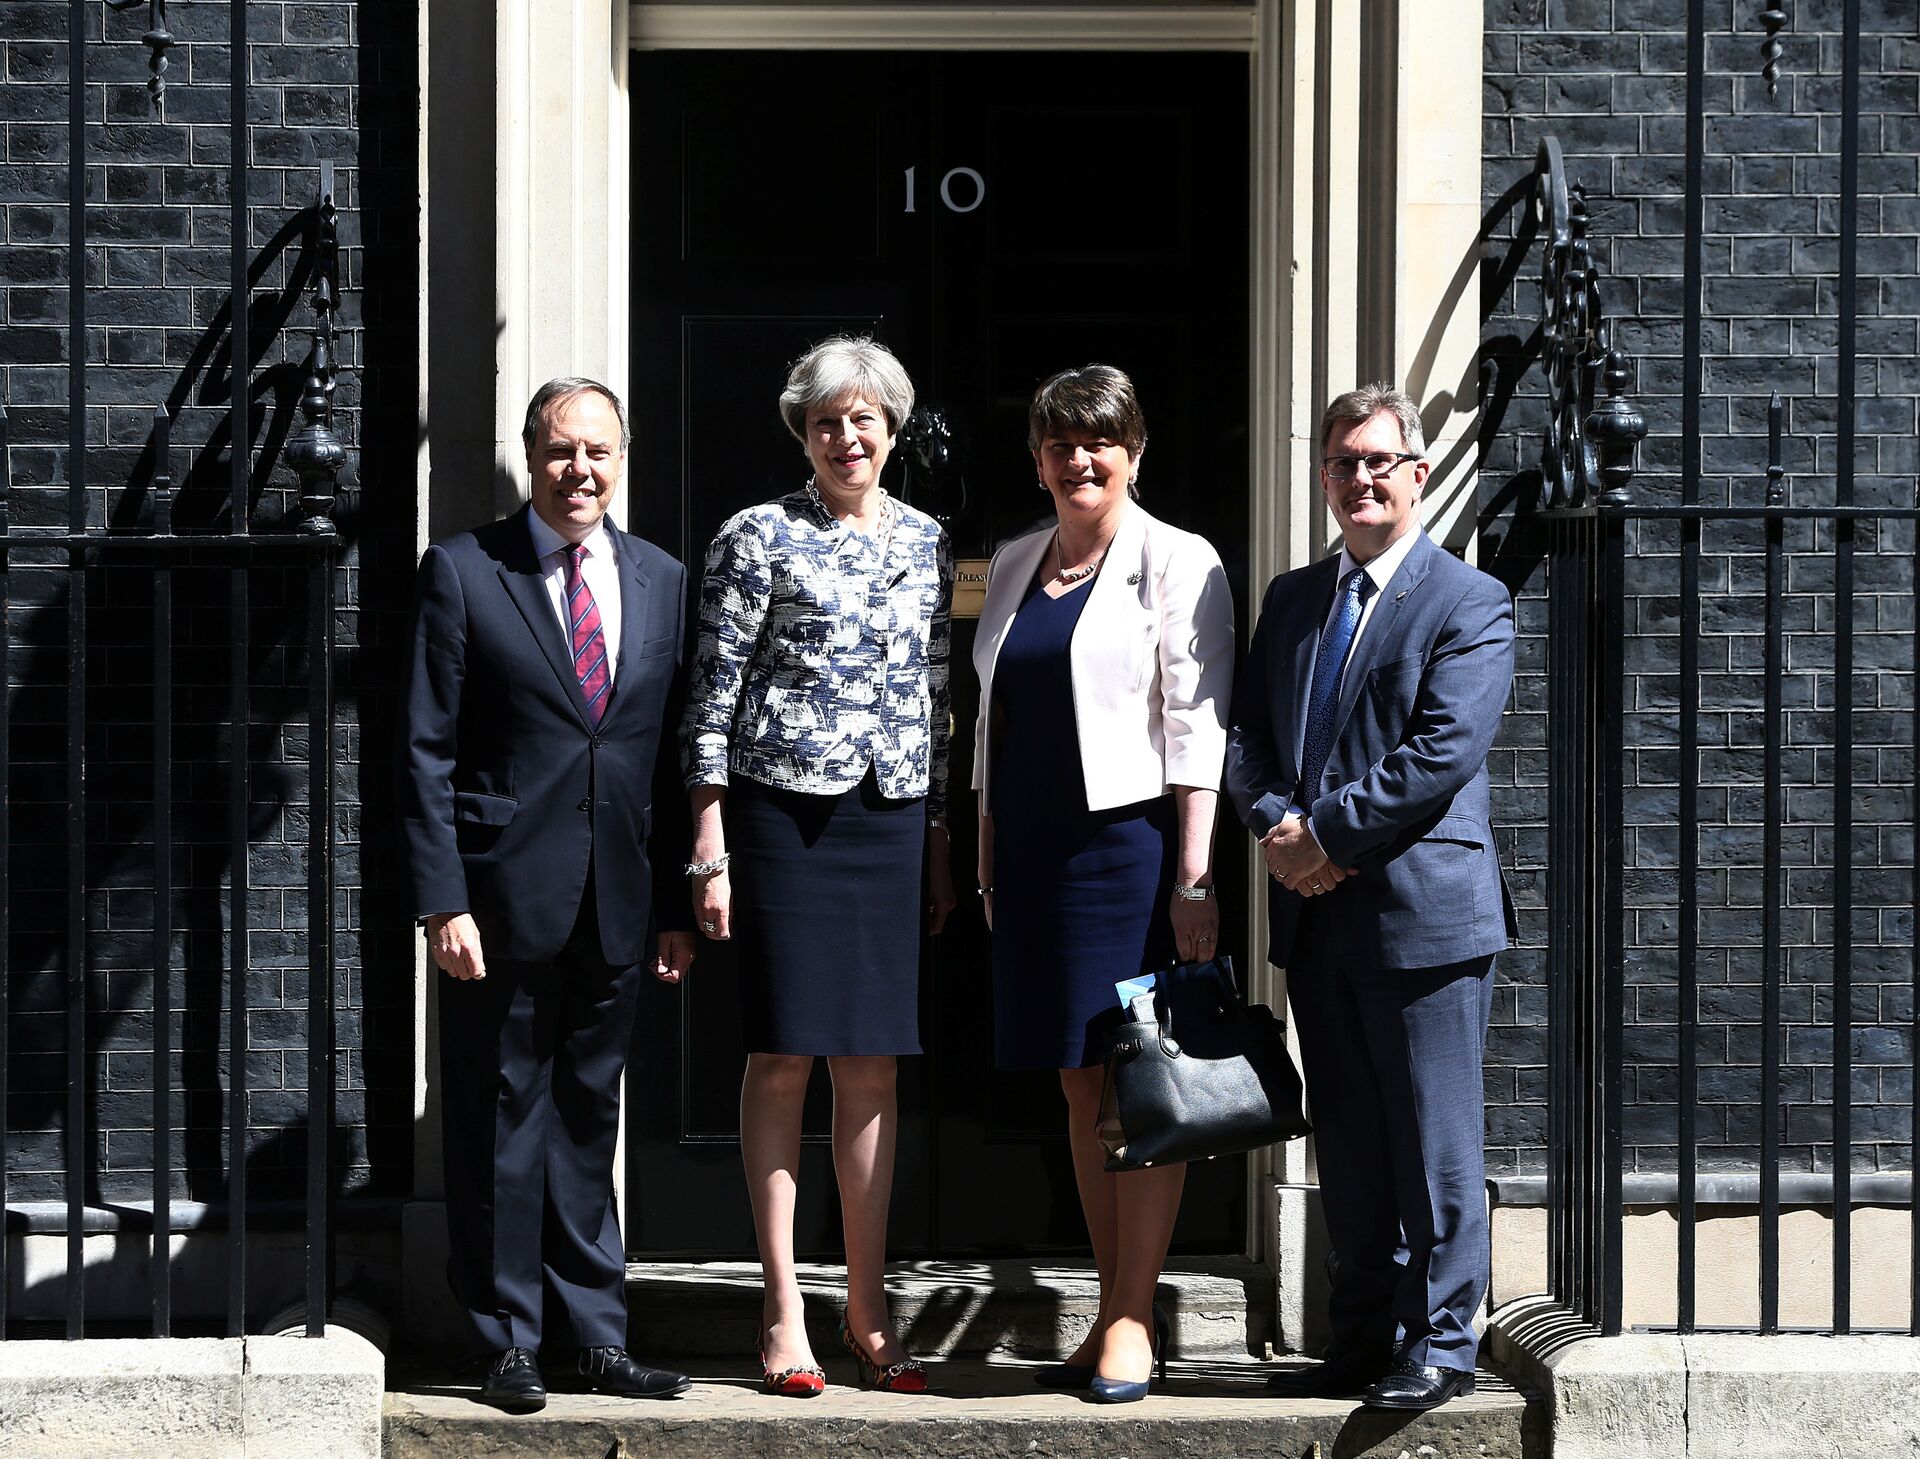 Musical Chairs: Jeffrey Donaldson Named As Third Leader of The DUP In 25 Days - Sputnik International, 1920, 22.06.2021